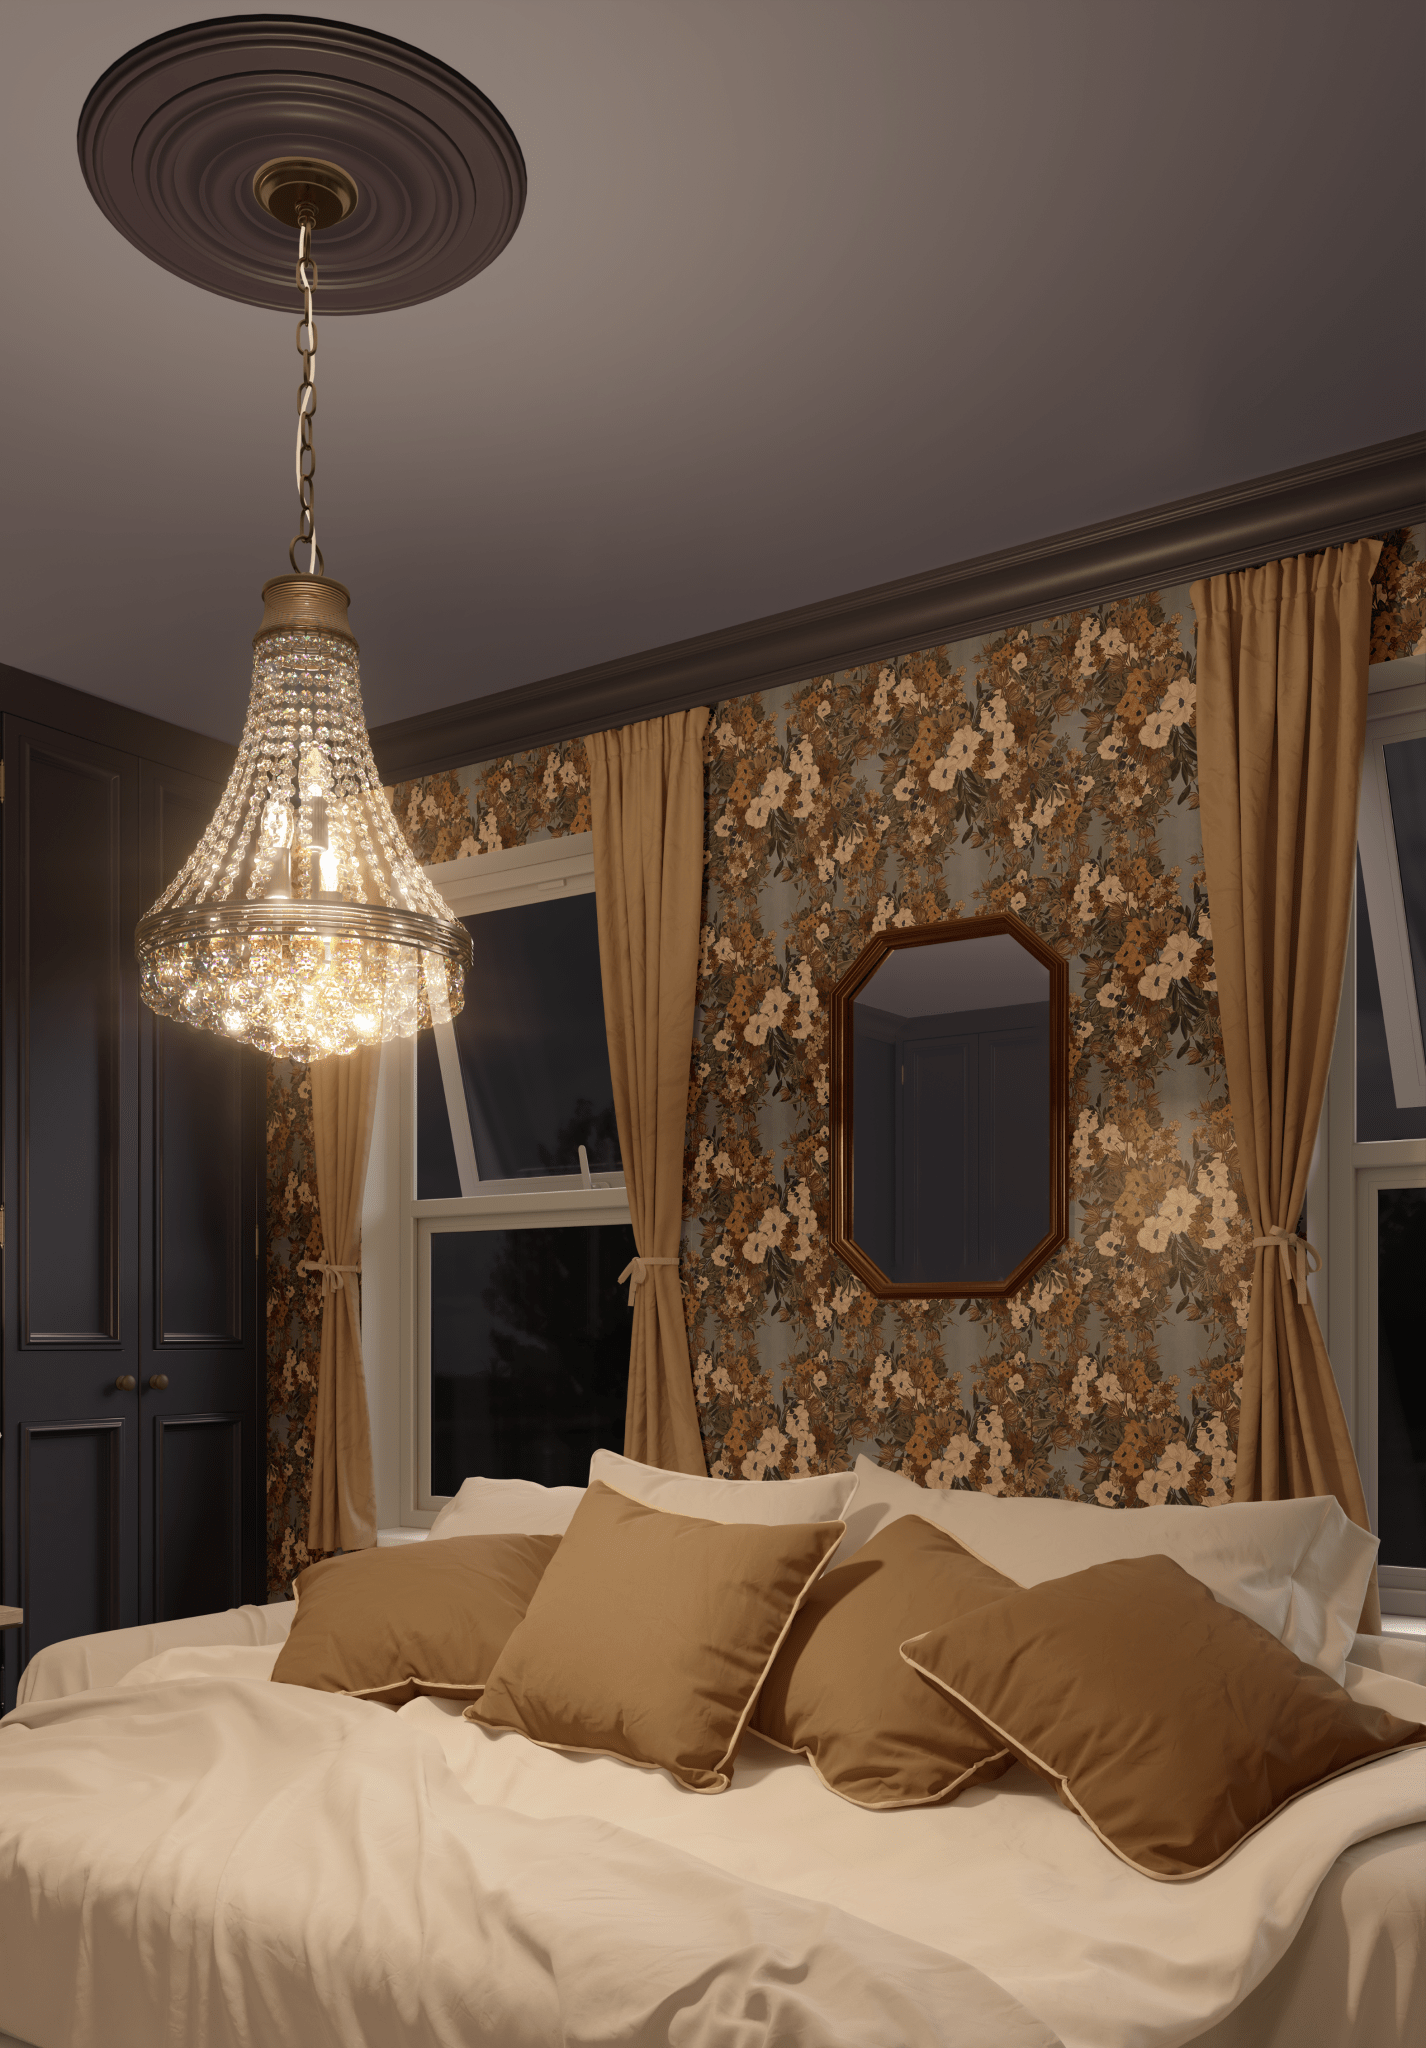 A classic bedroom interior featuring an opulent crystal chandelier and vintage floral wallpaper. The decor includes a plush bed with cream linens and matching curtains, all enhanced by rich, dark wood furniture and an elegant octagonal mirror.